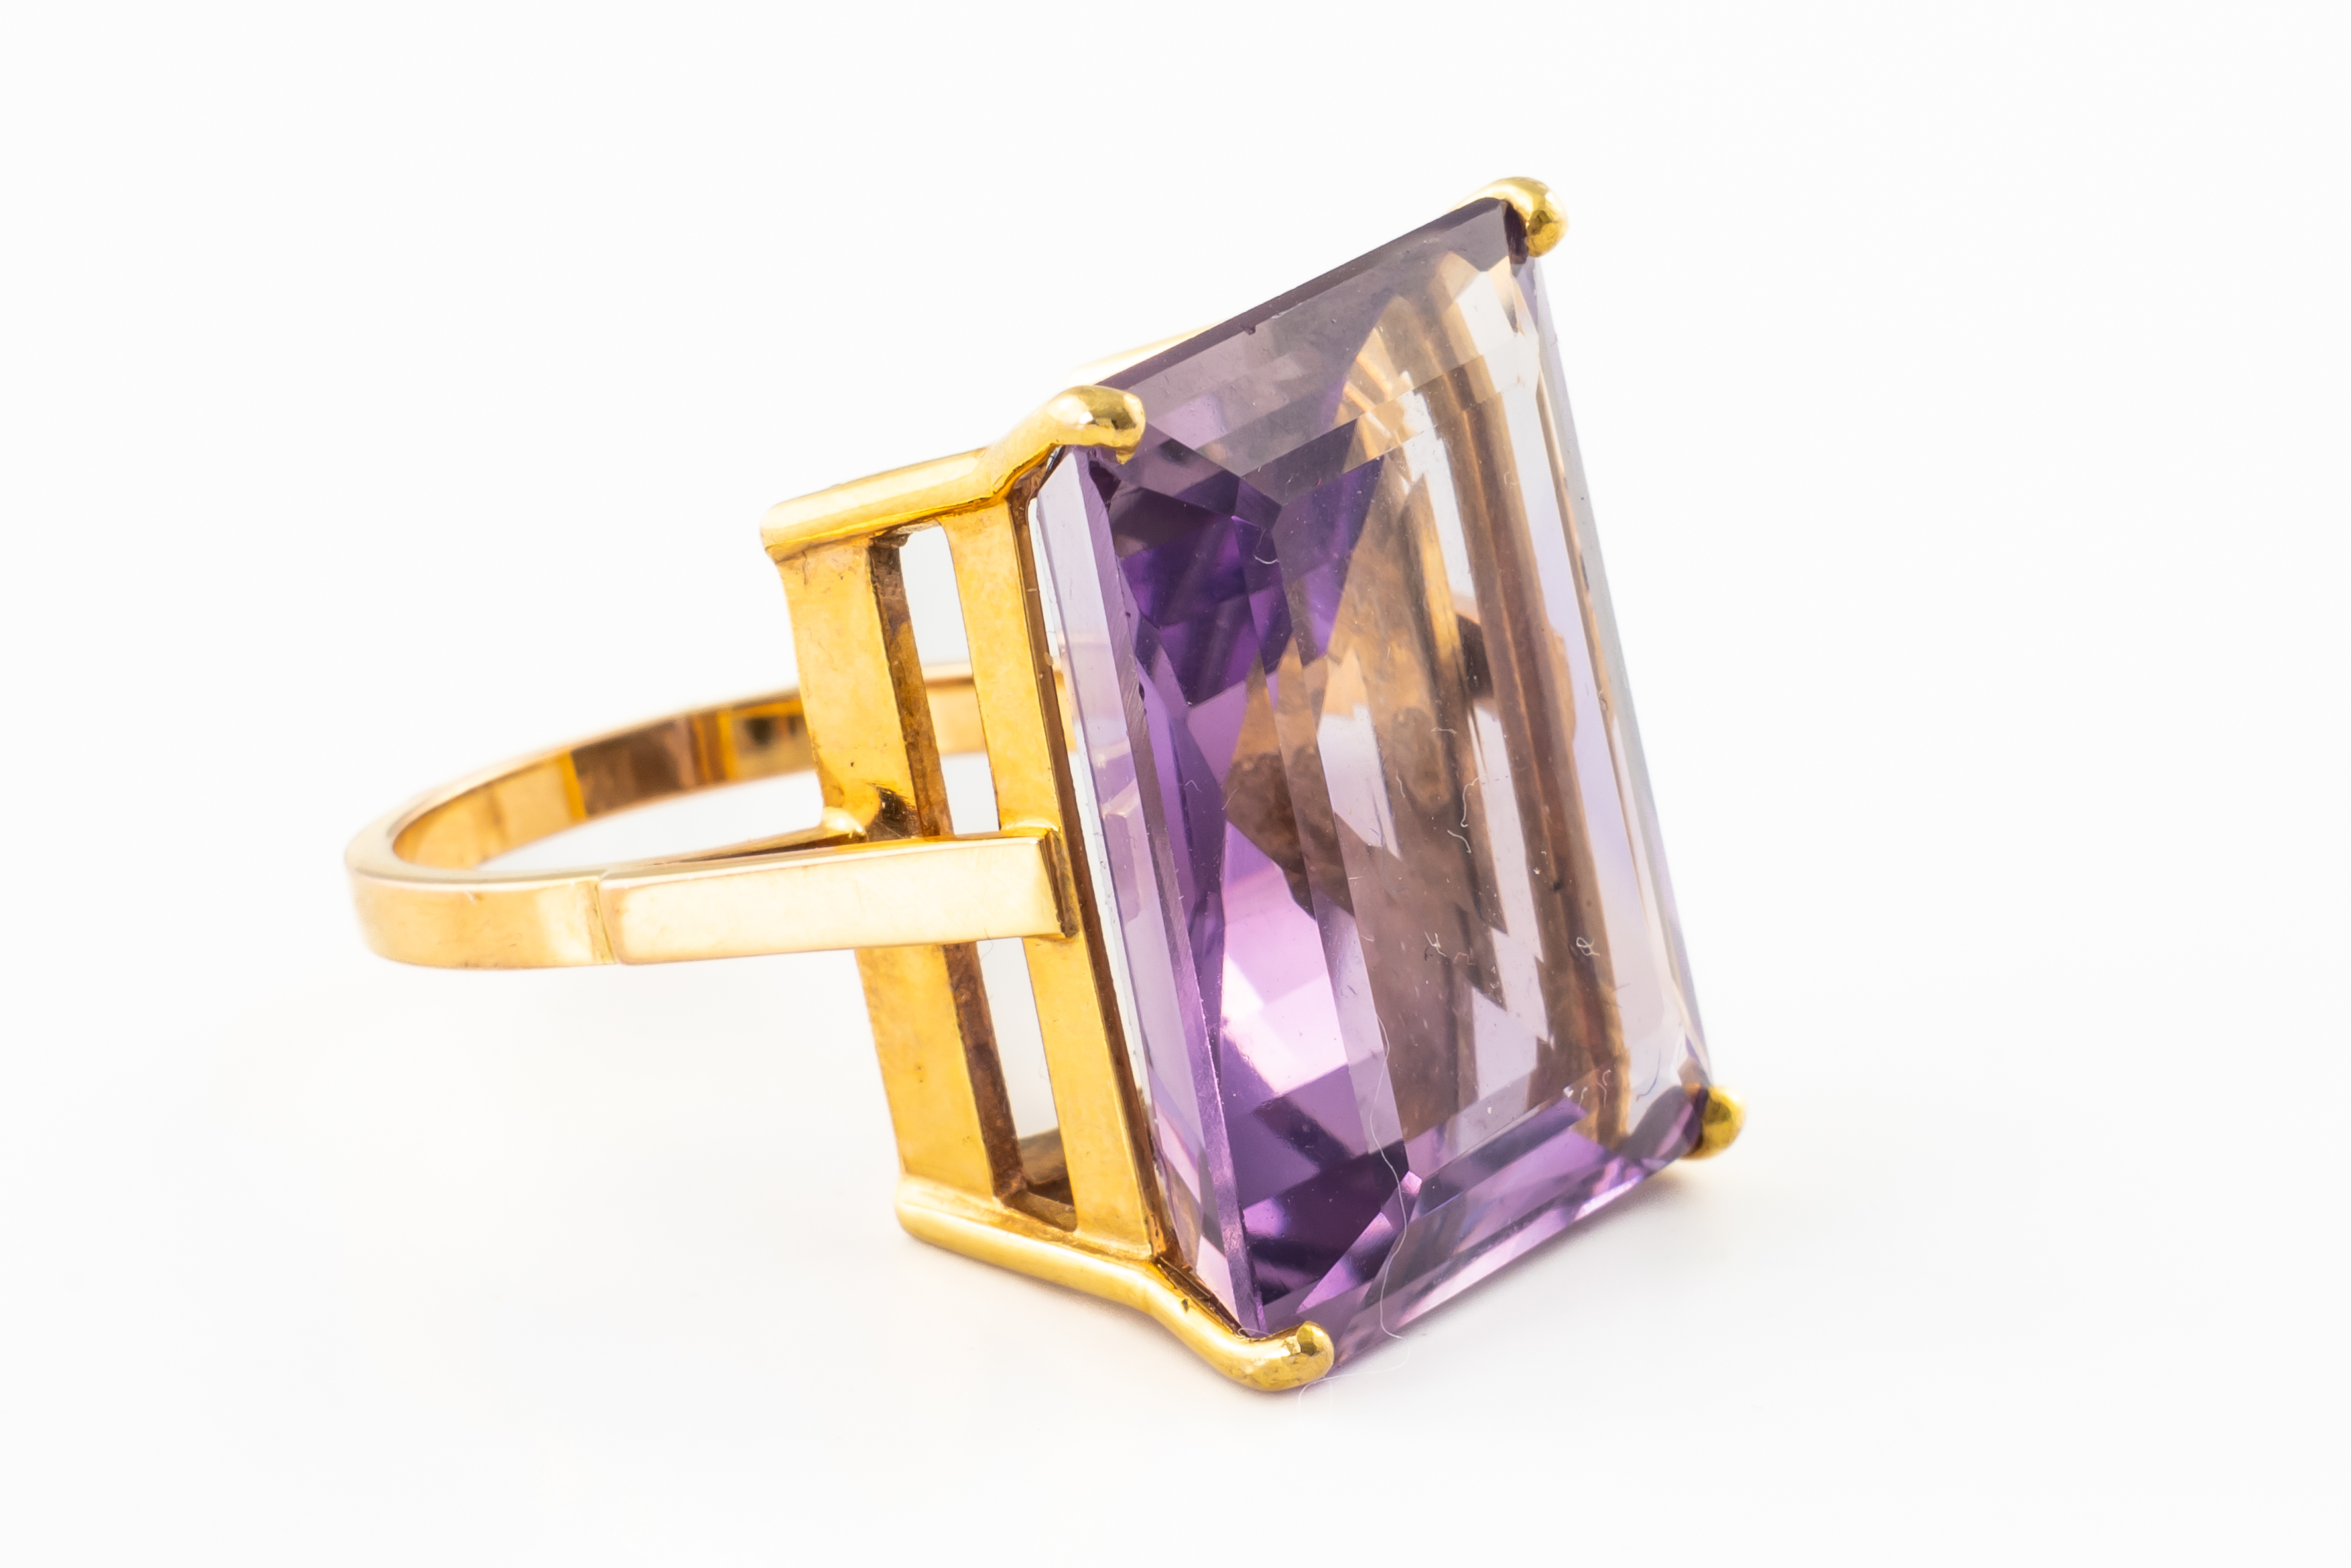 A LARGE AMETHYST COCKTAIL RING - Image 2 of 4